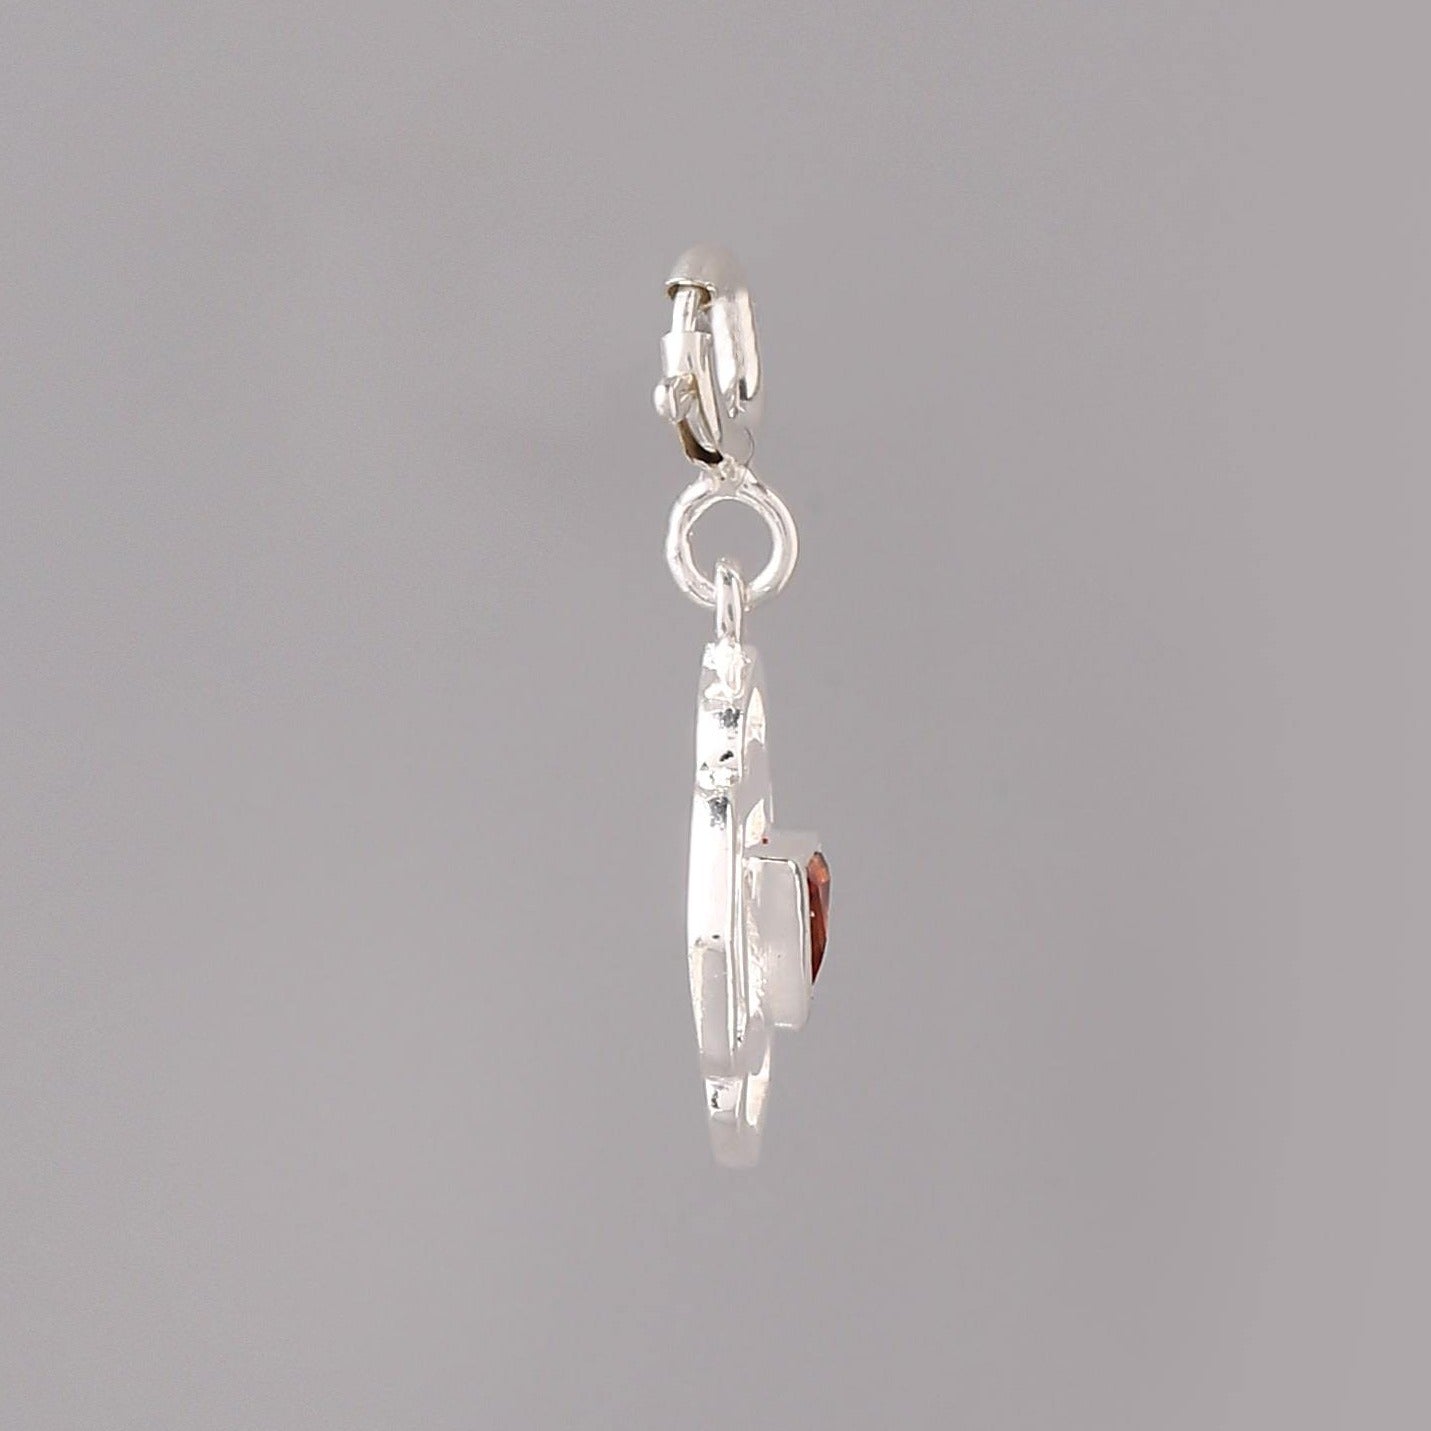 Sterling Silver Root Chakra Charm